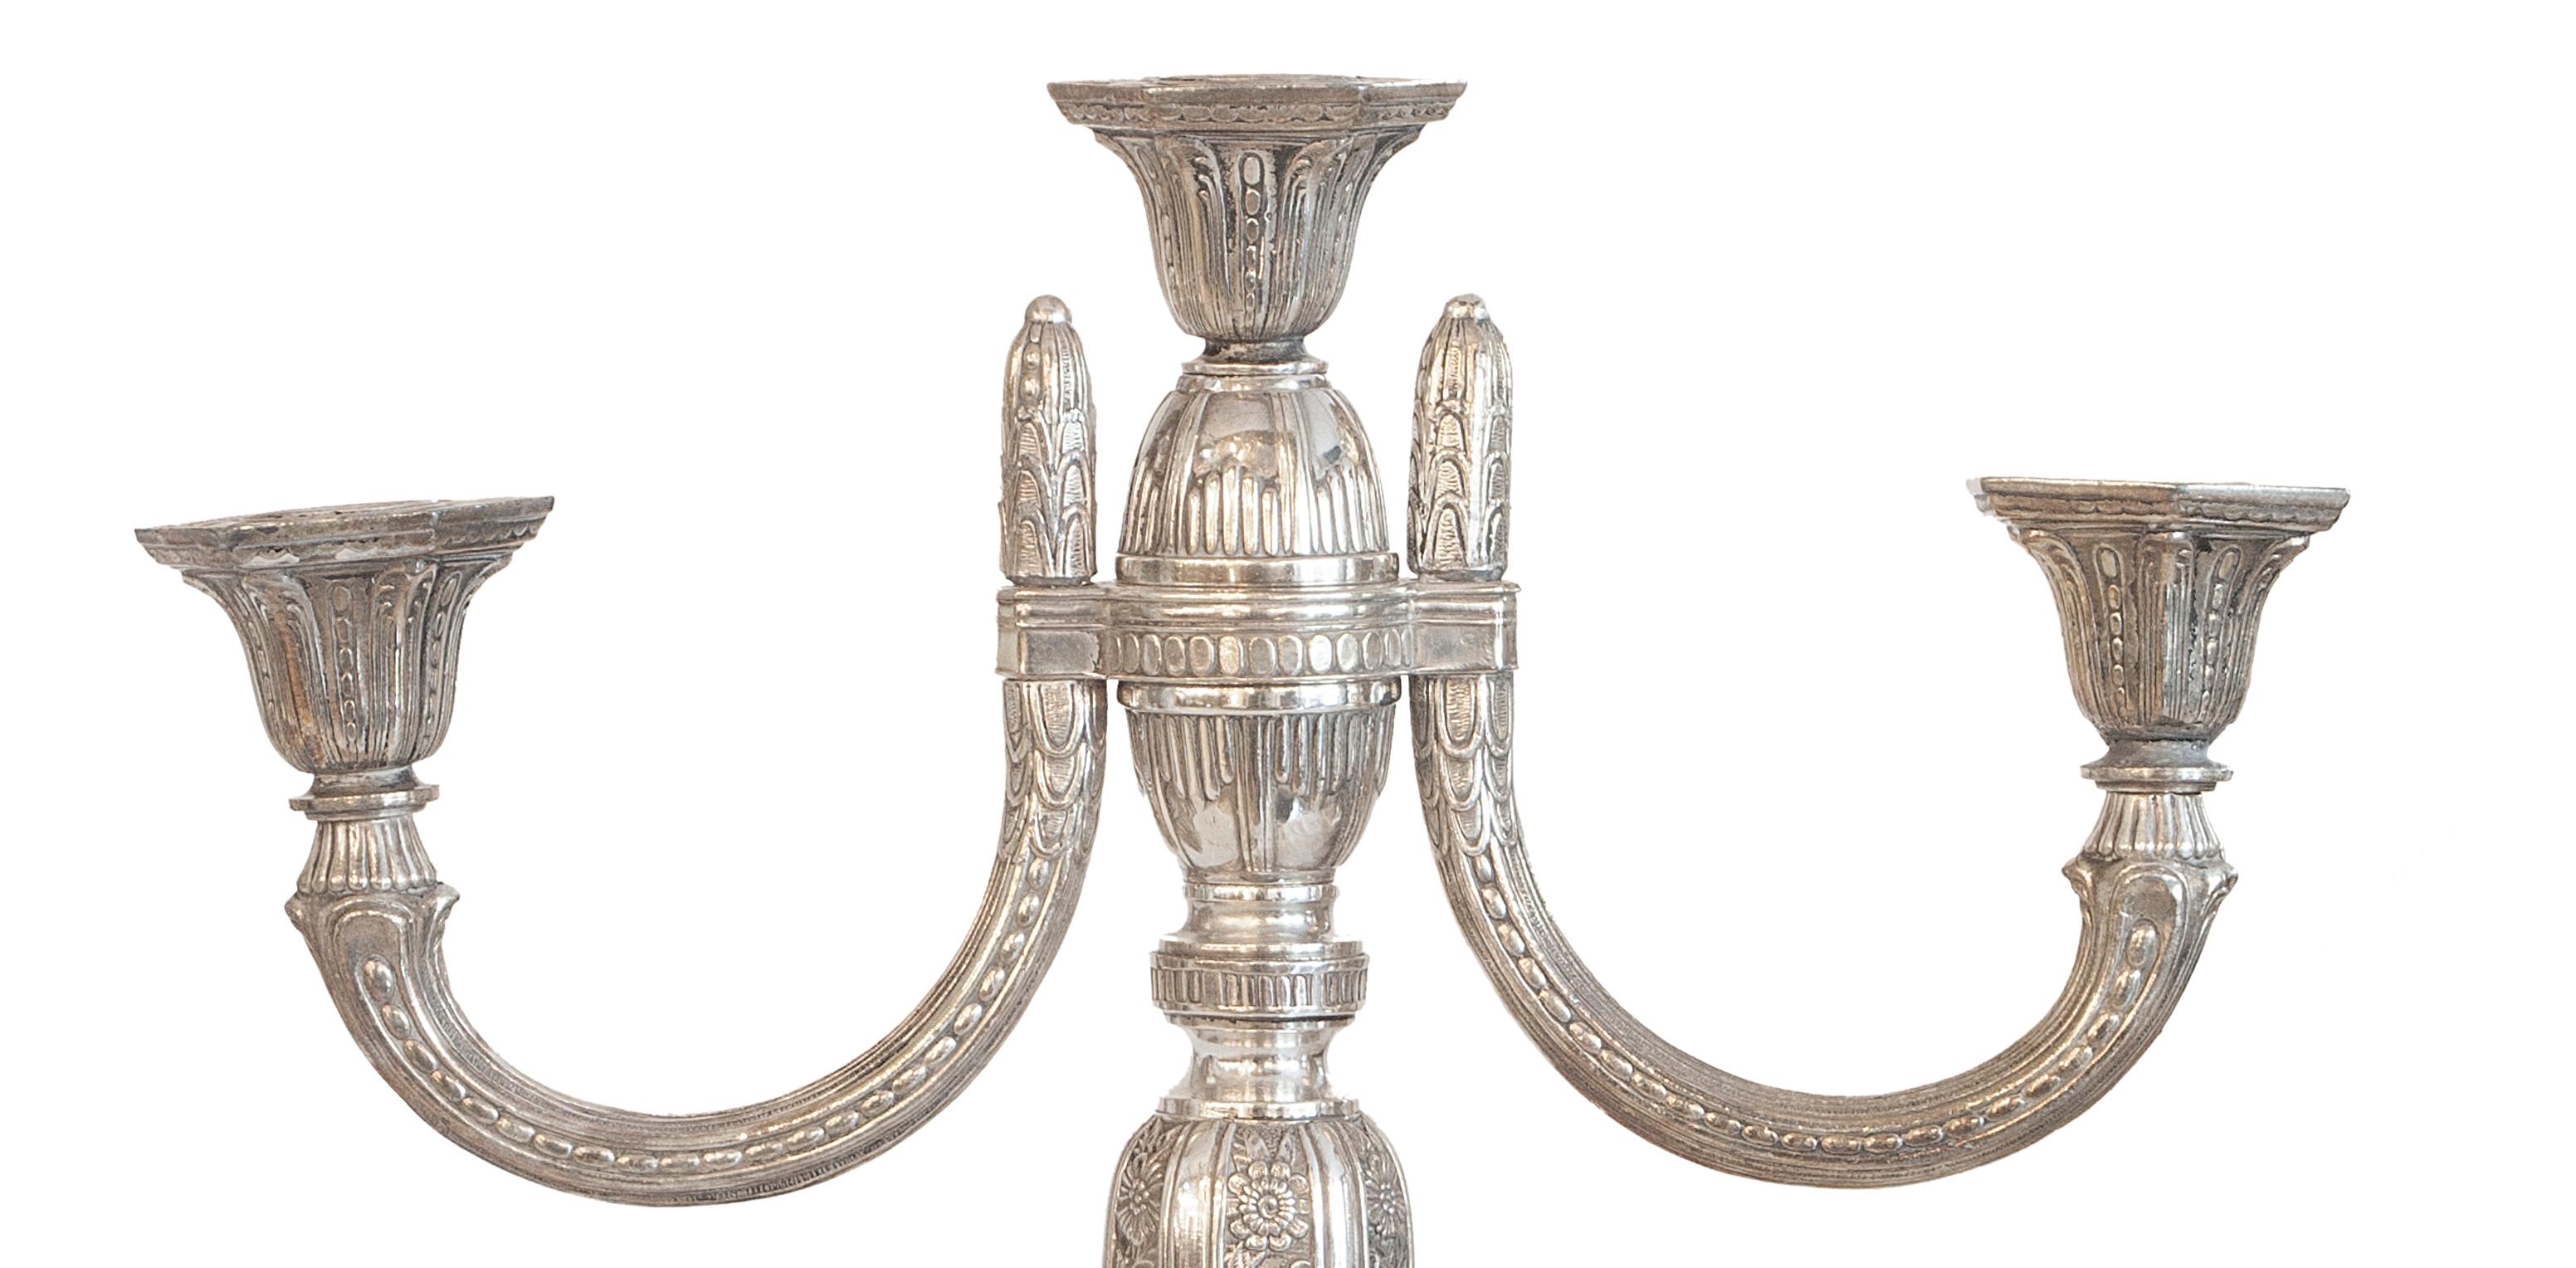 Pair of Candelabras, Art Deco in Silverplated, 1930 For Sale 1